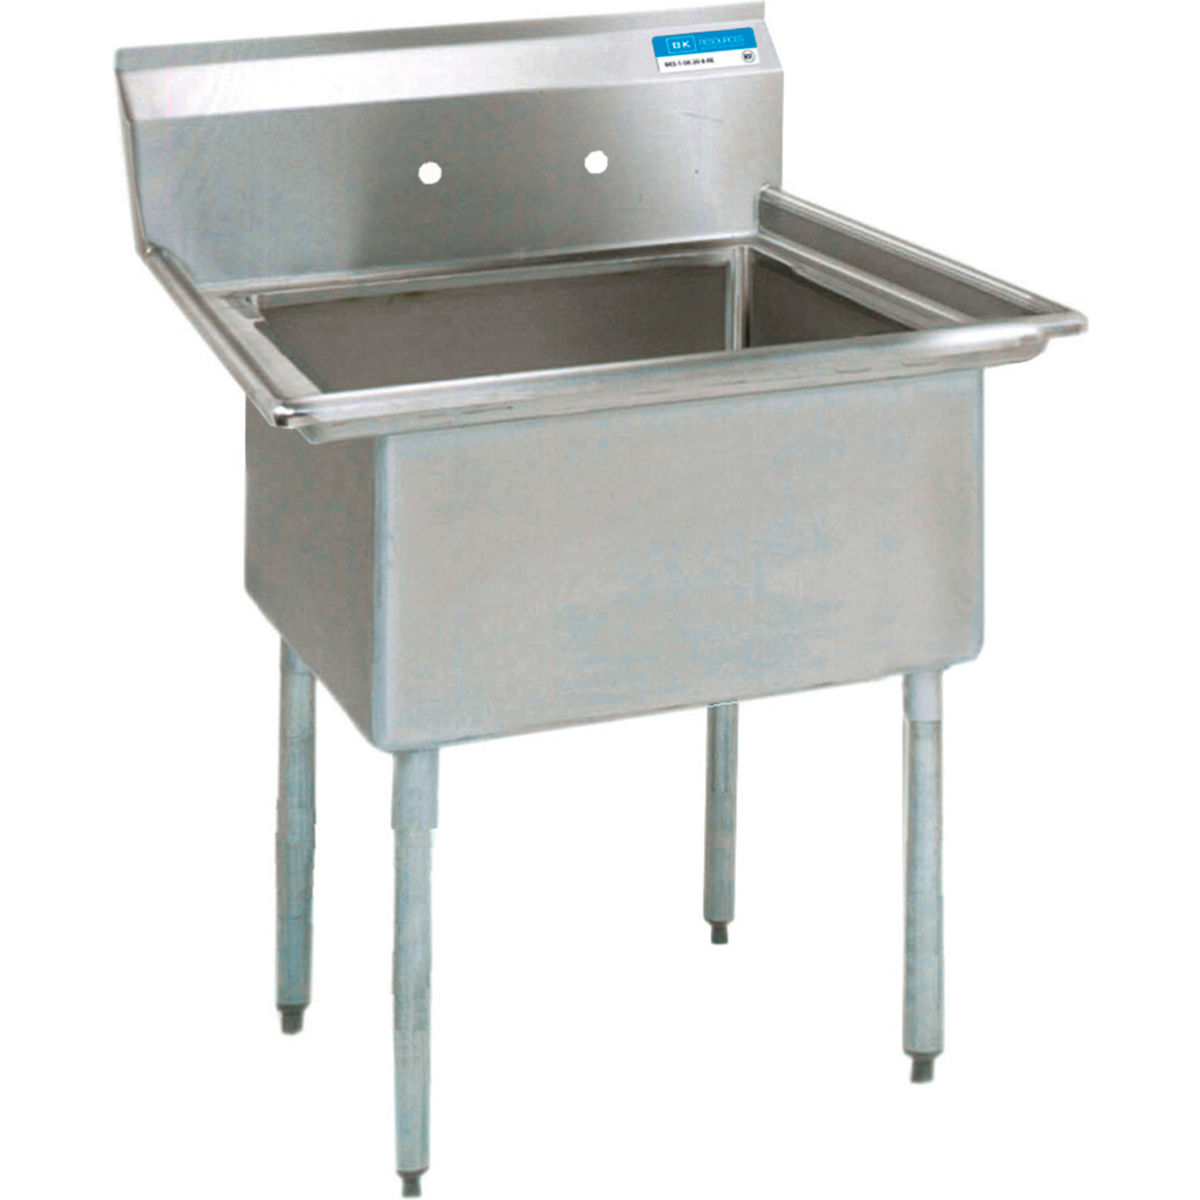 Picture of BK Resources B2260809 Galvanized Legs 1-Compartment Sink - 18 x 18 x 12 in.